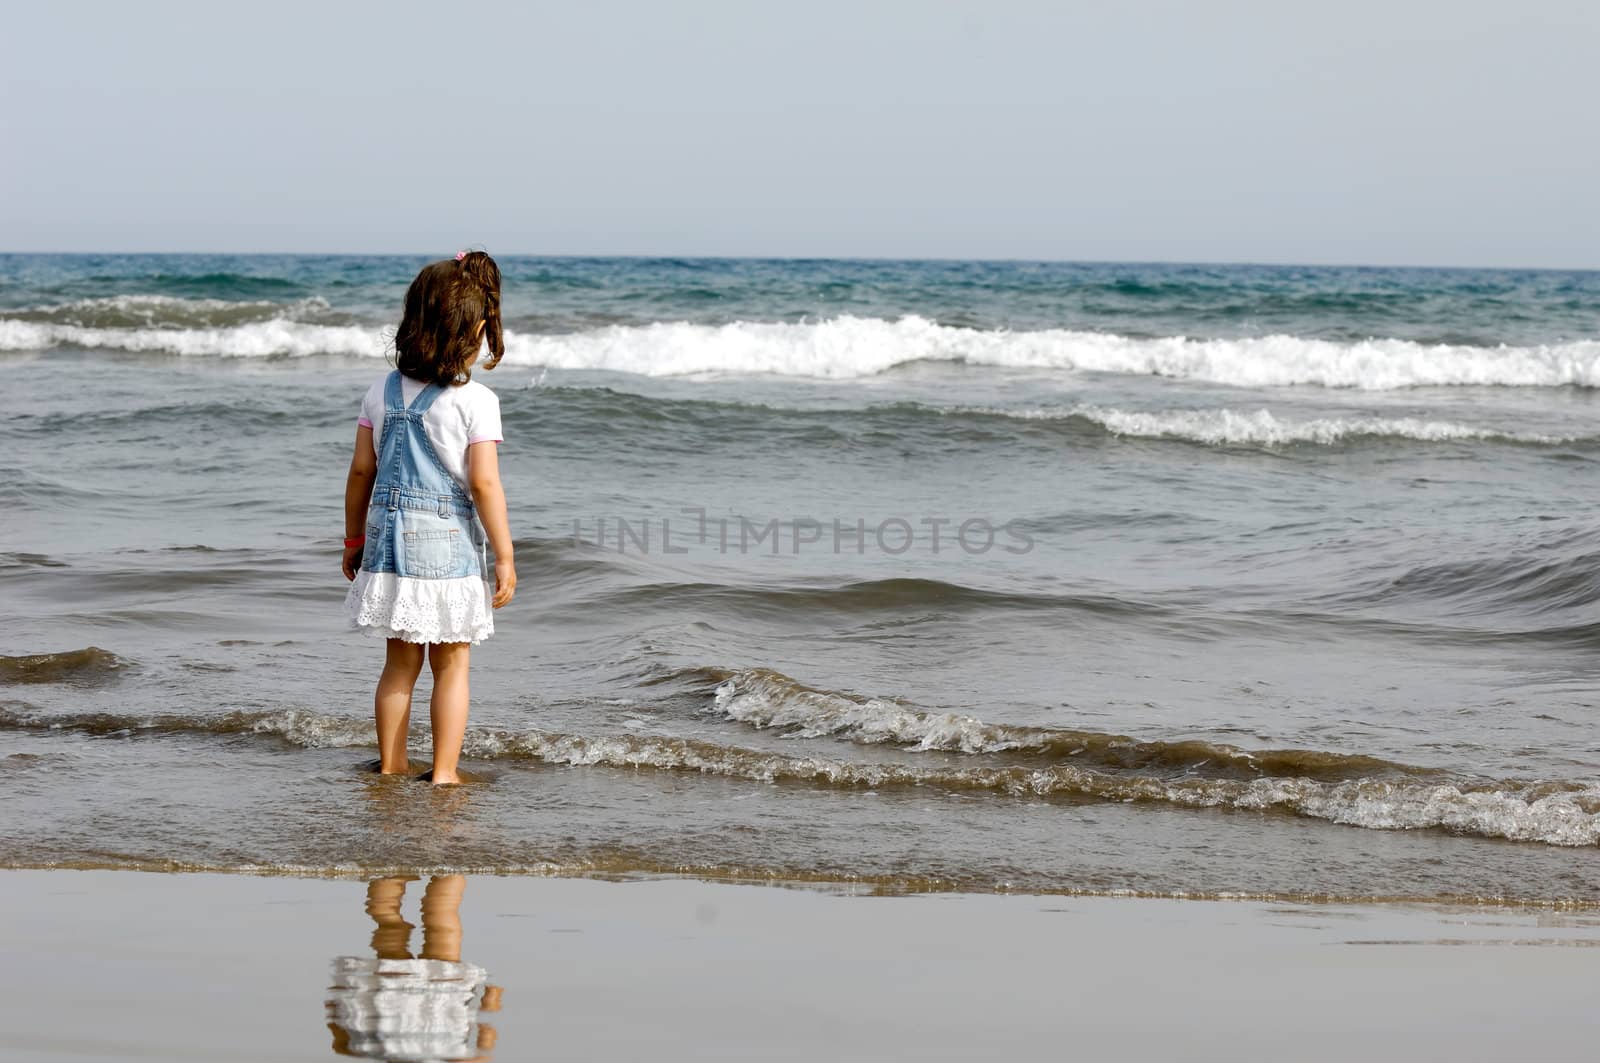 Child is standing in the ocean alone.